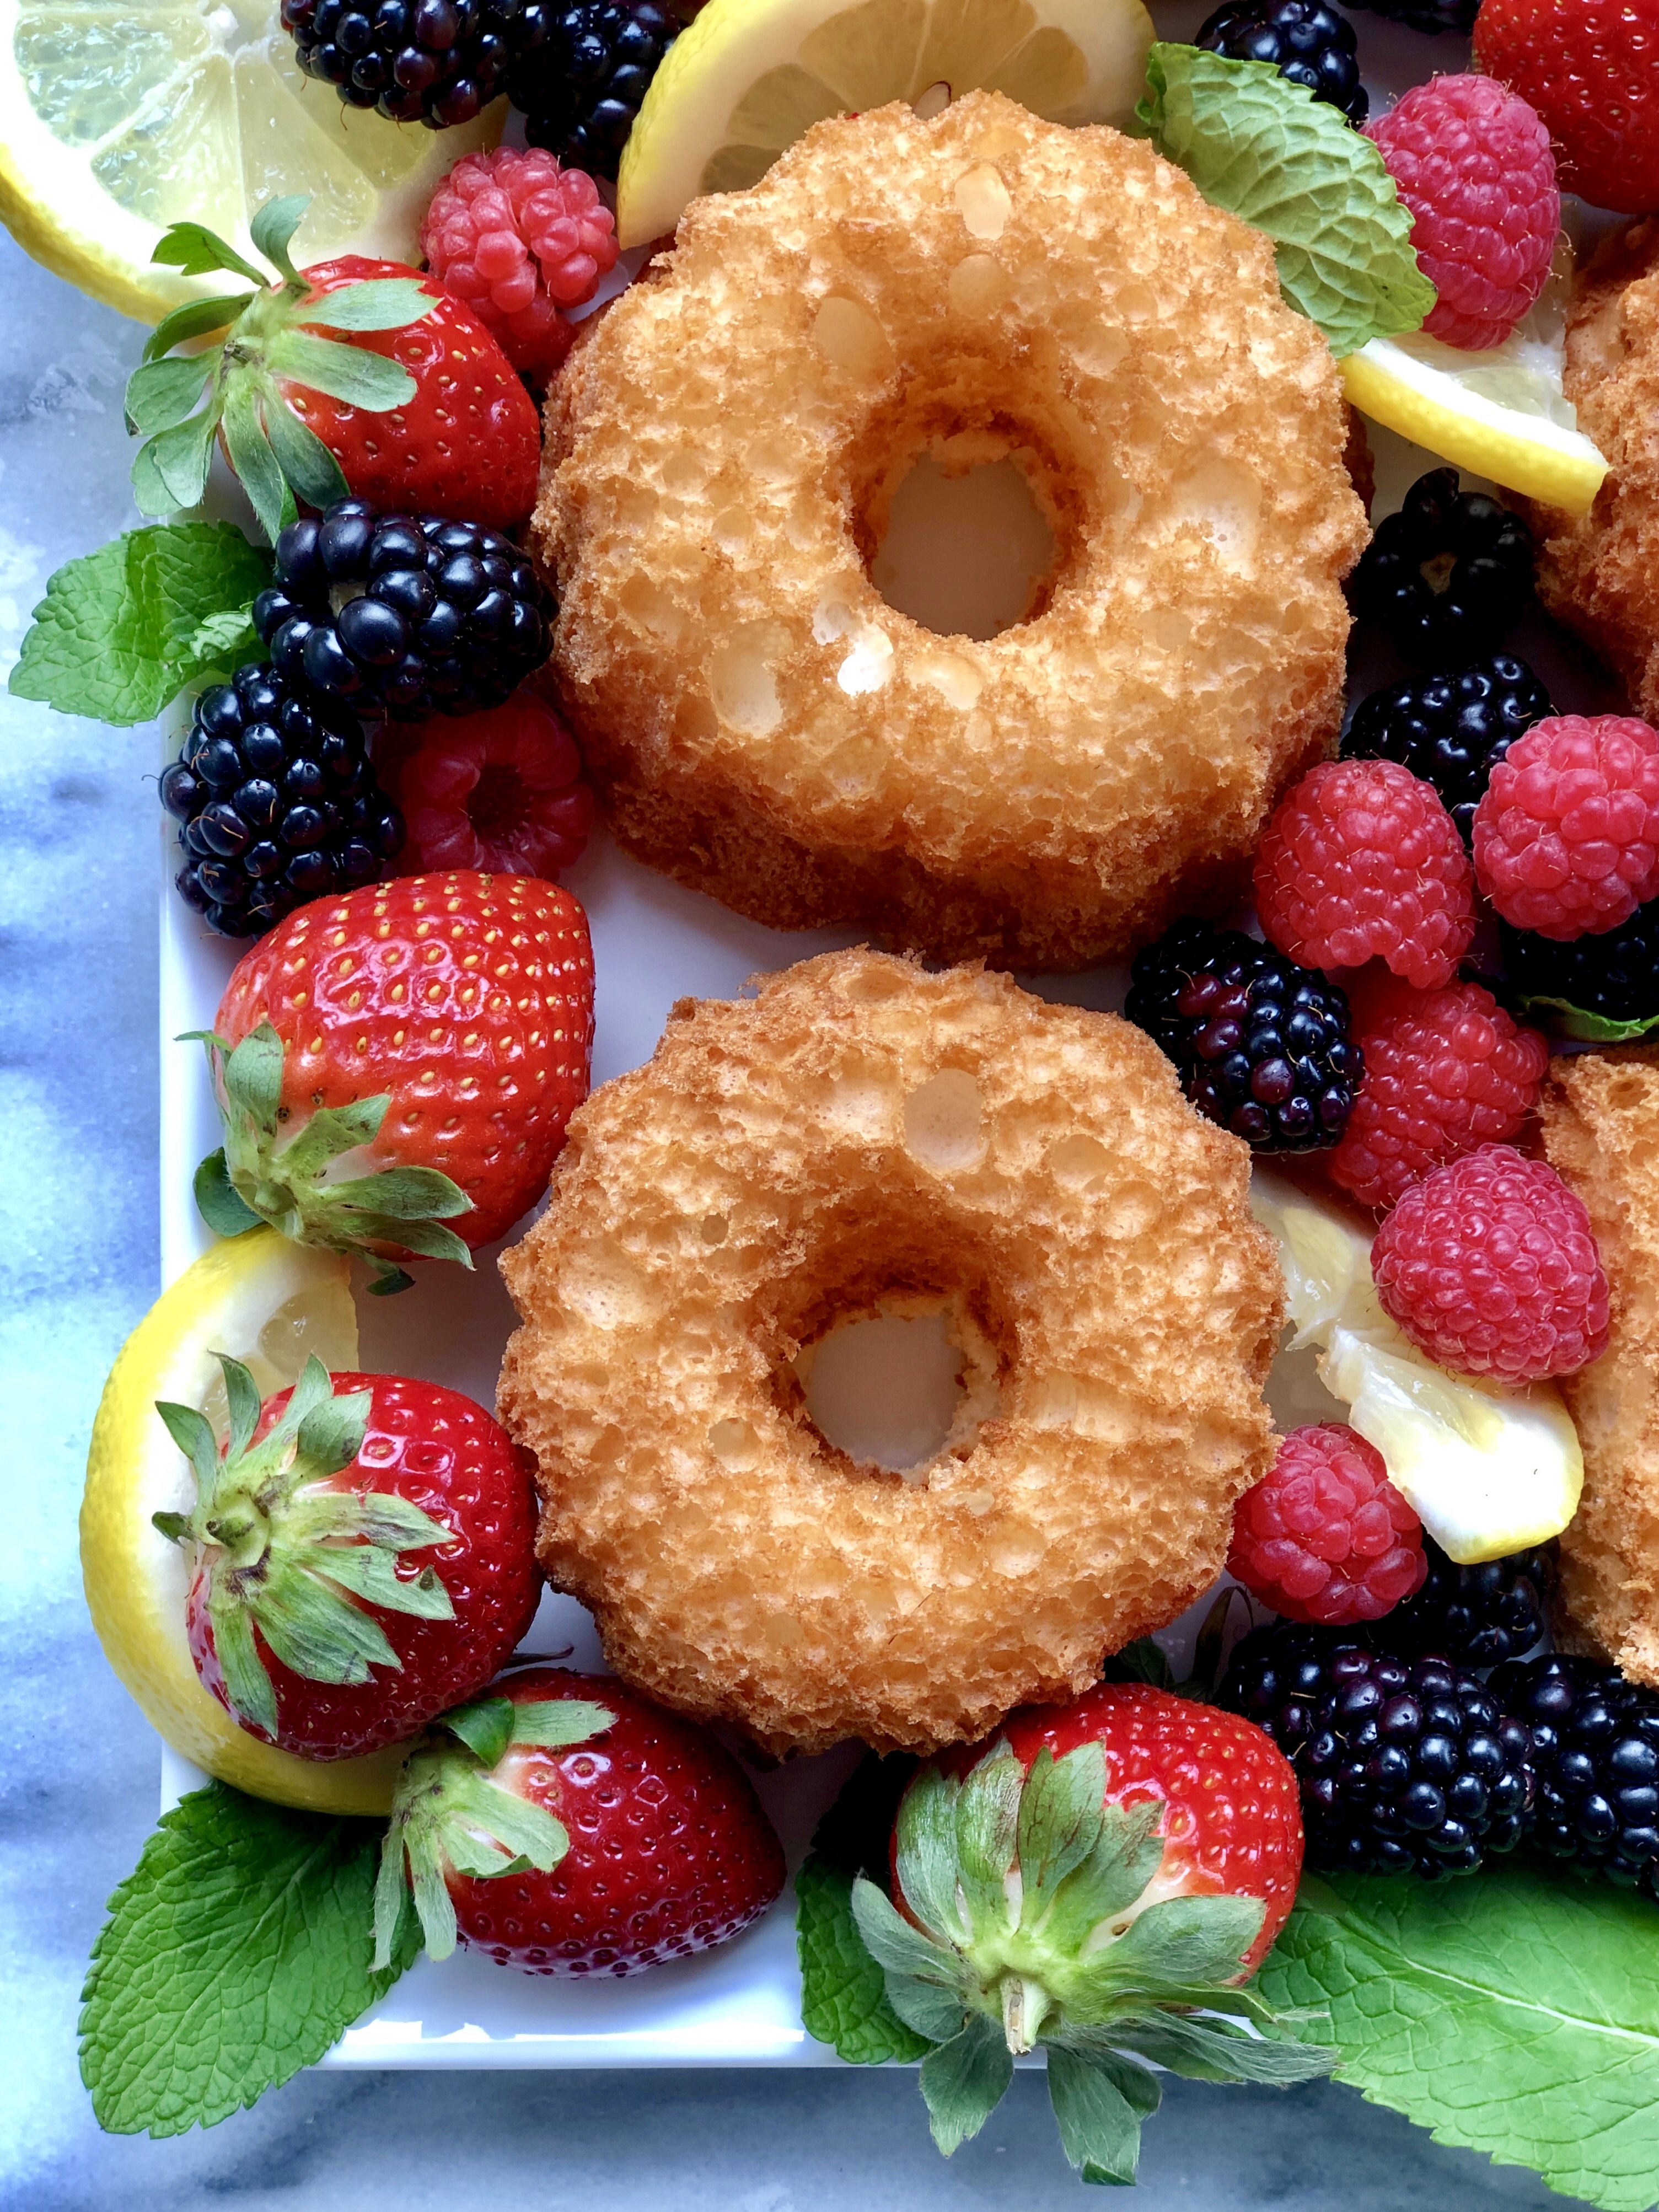 Light in flavor and topped with fresh farmers market fruit and lemon whipped cream, this Lemon Angel Food Cake Platter is perfect for warm-weather entertaining. A no-cholesterol cake recipe that's a healthier dessert option when you're craving something sweet.